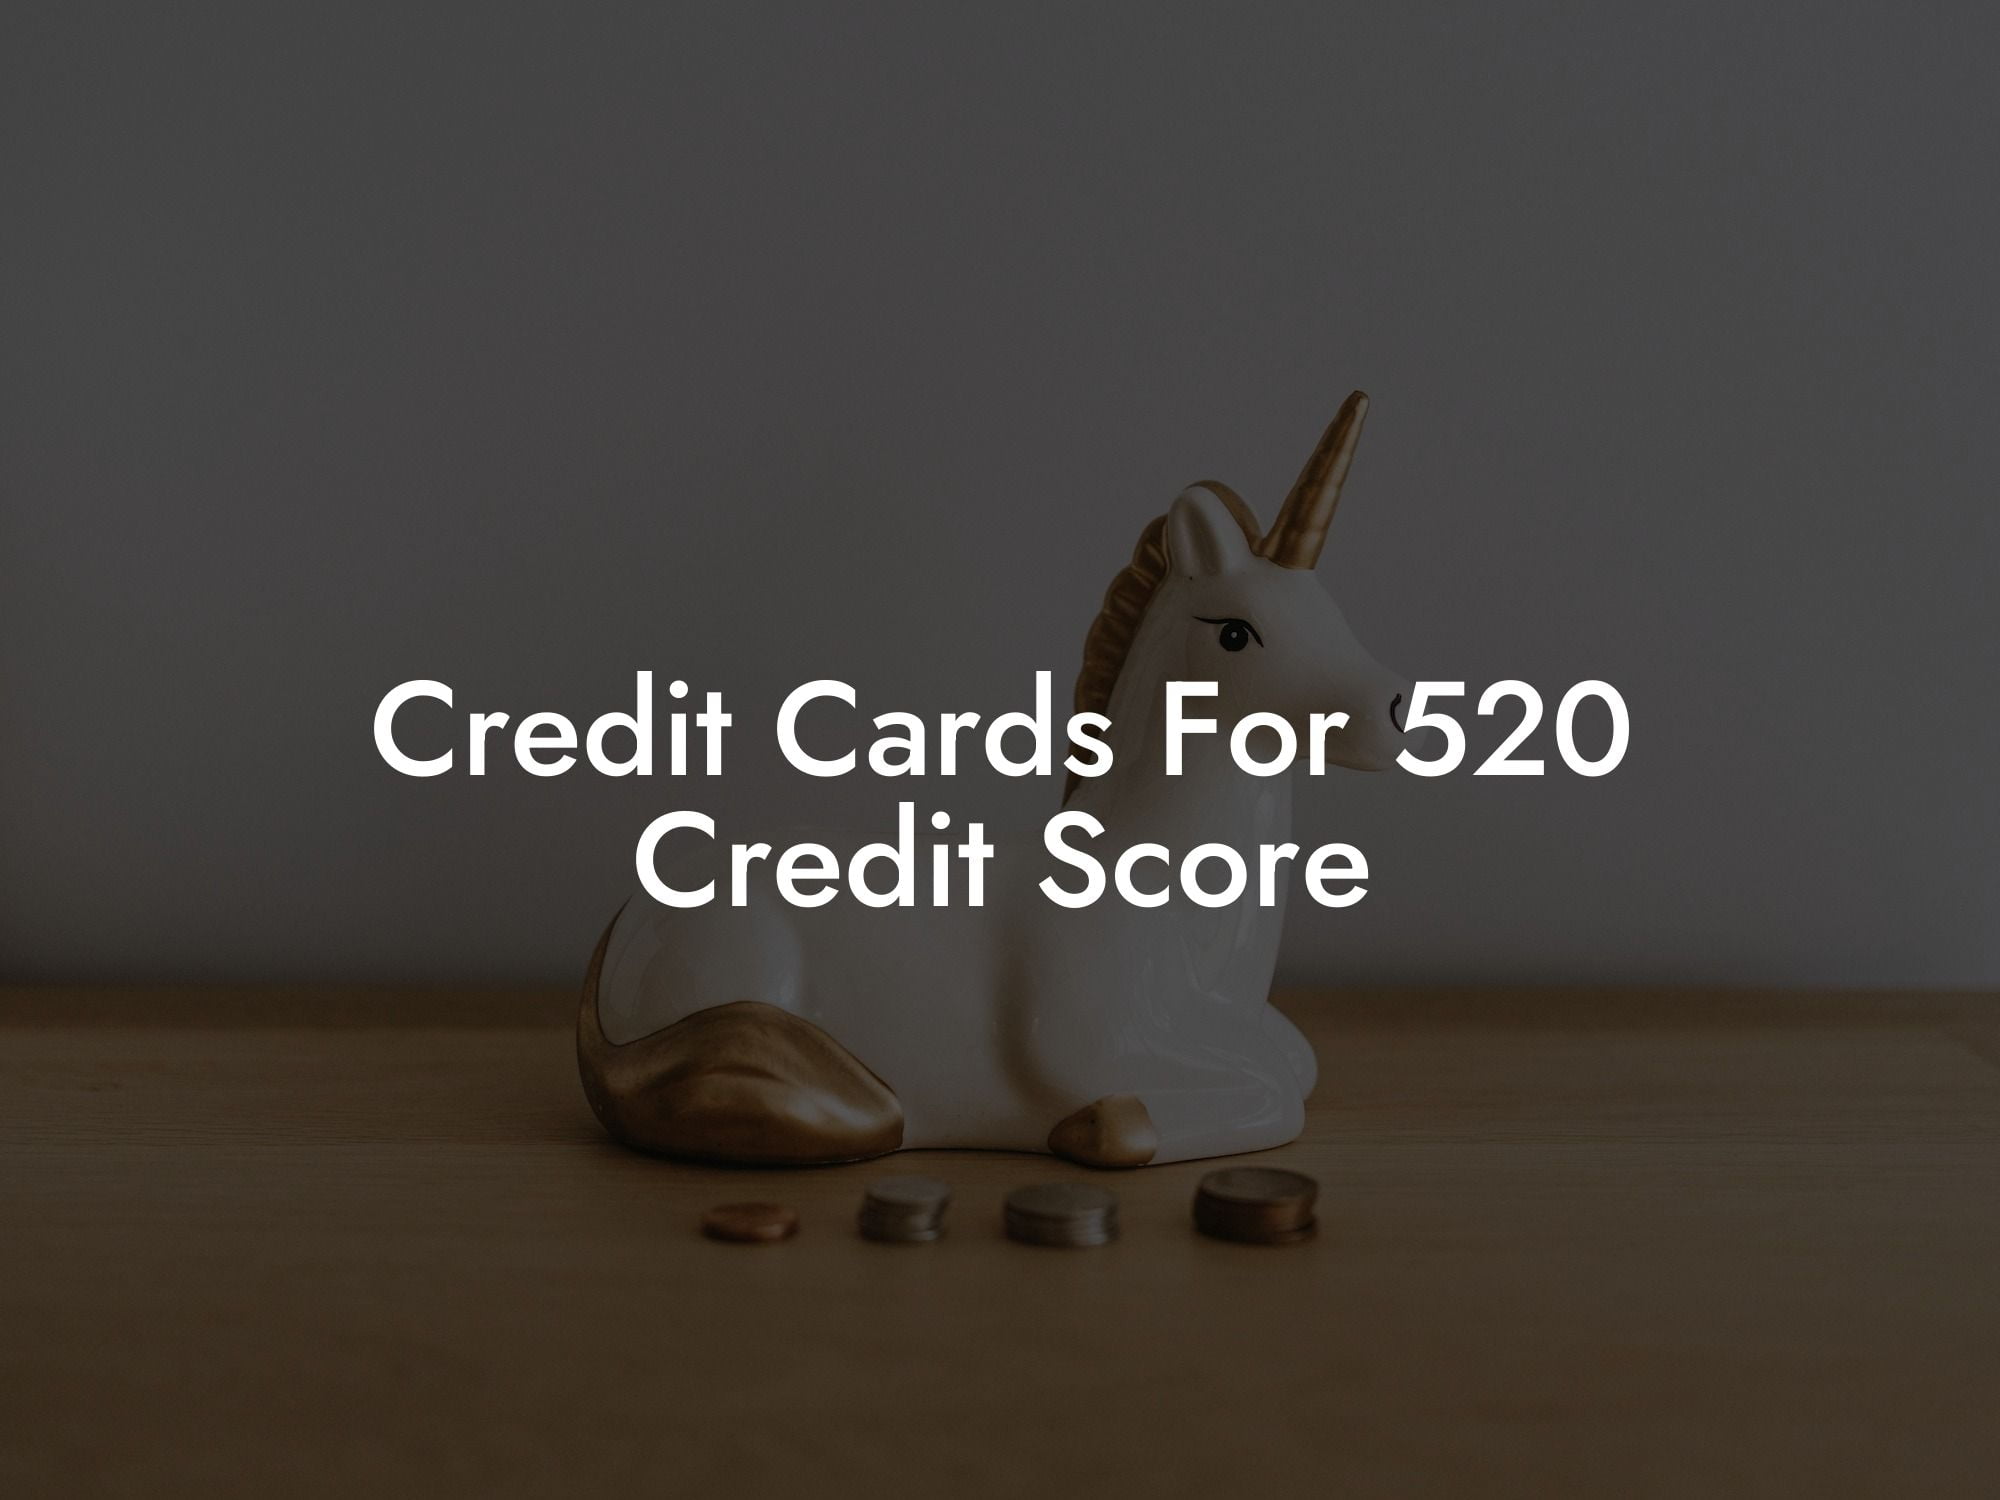 Credit Cards For 520 Credit Score